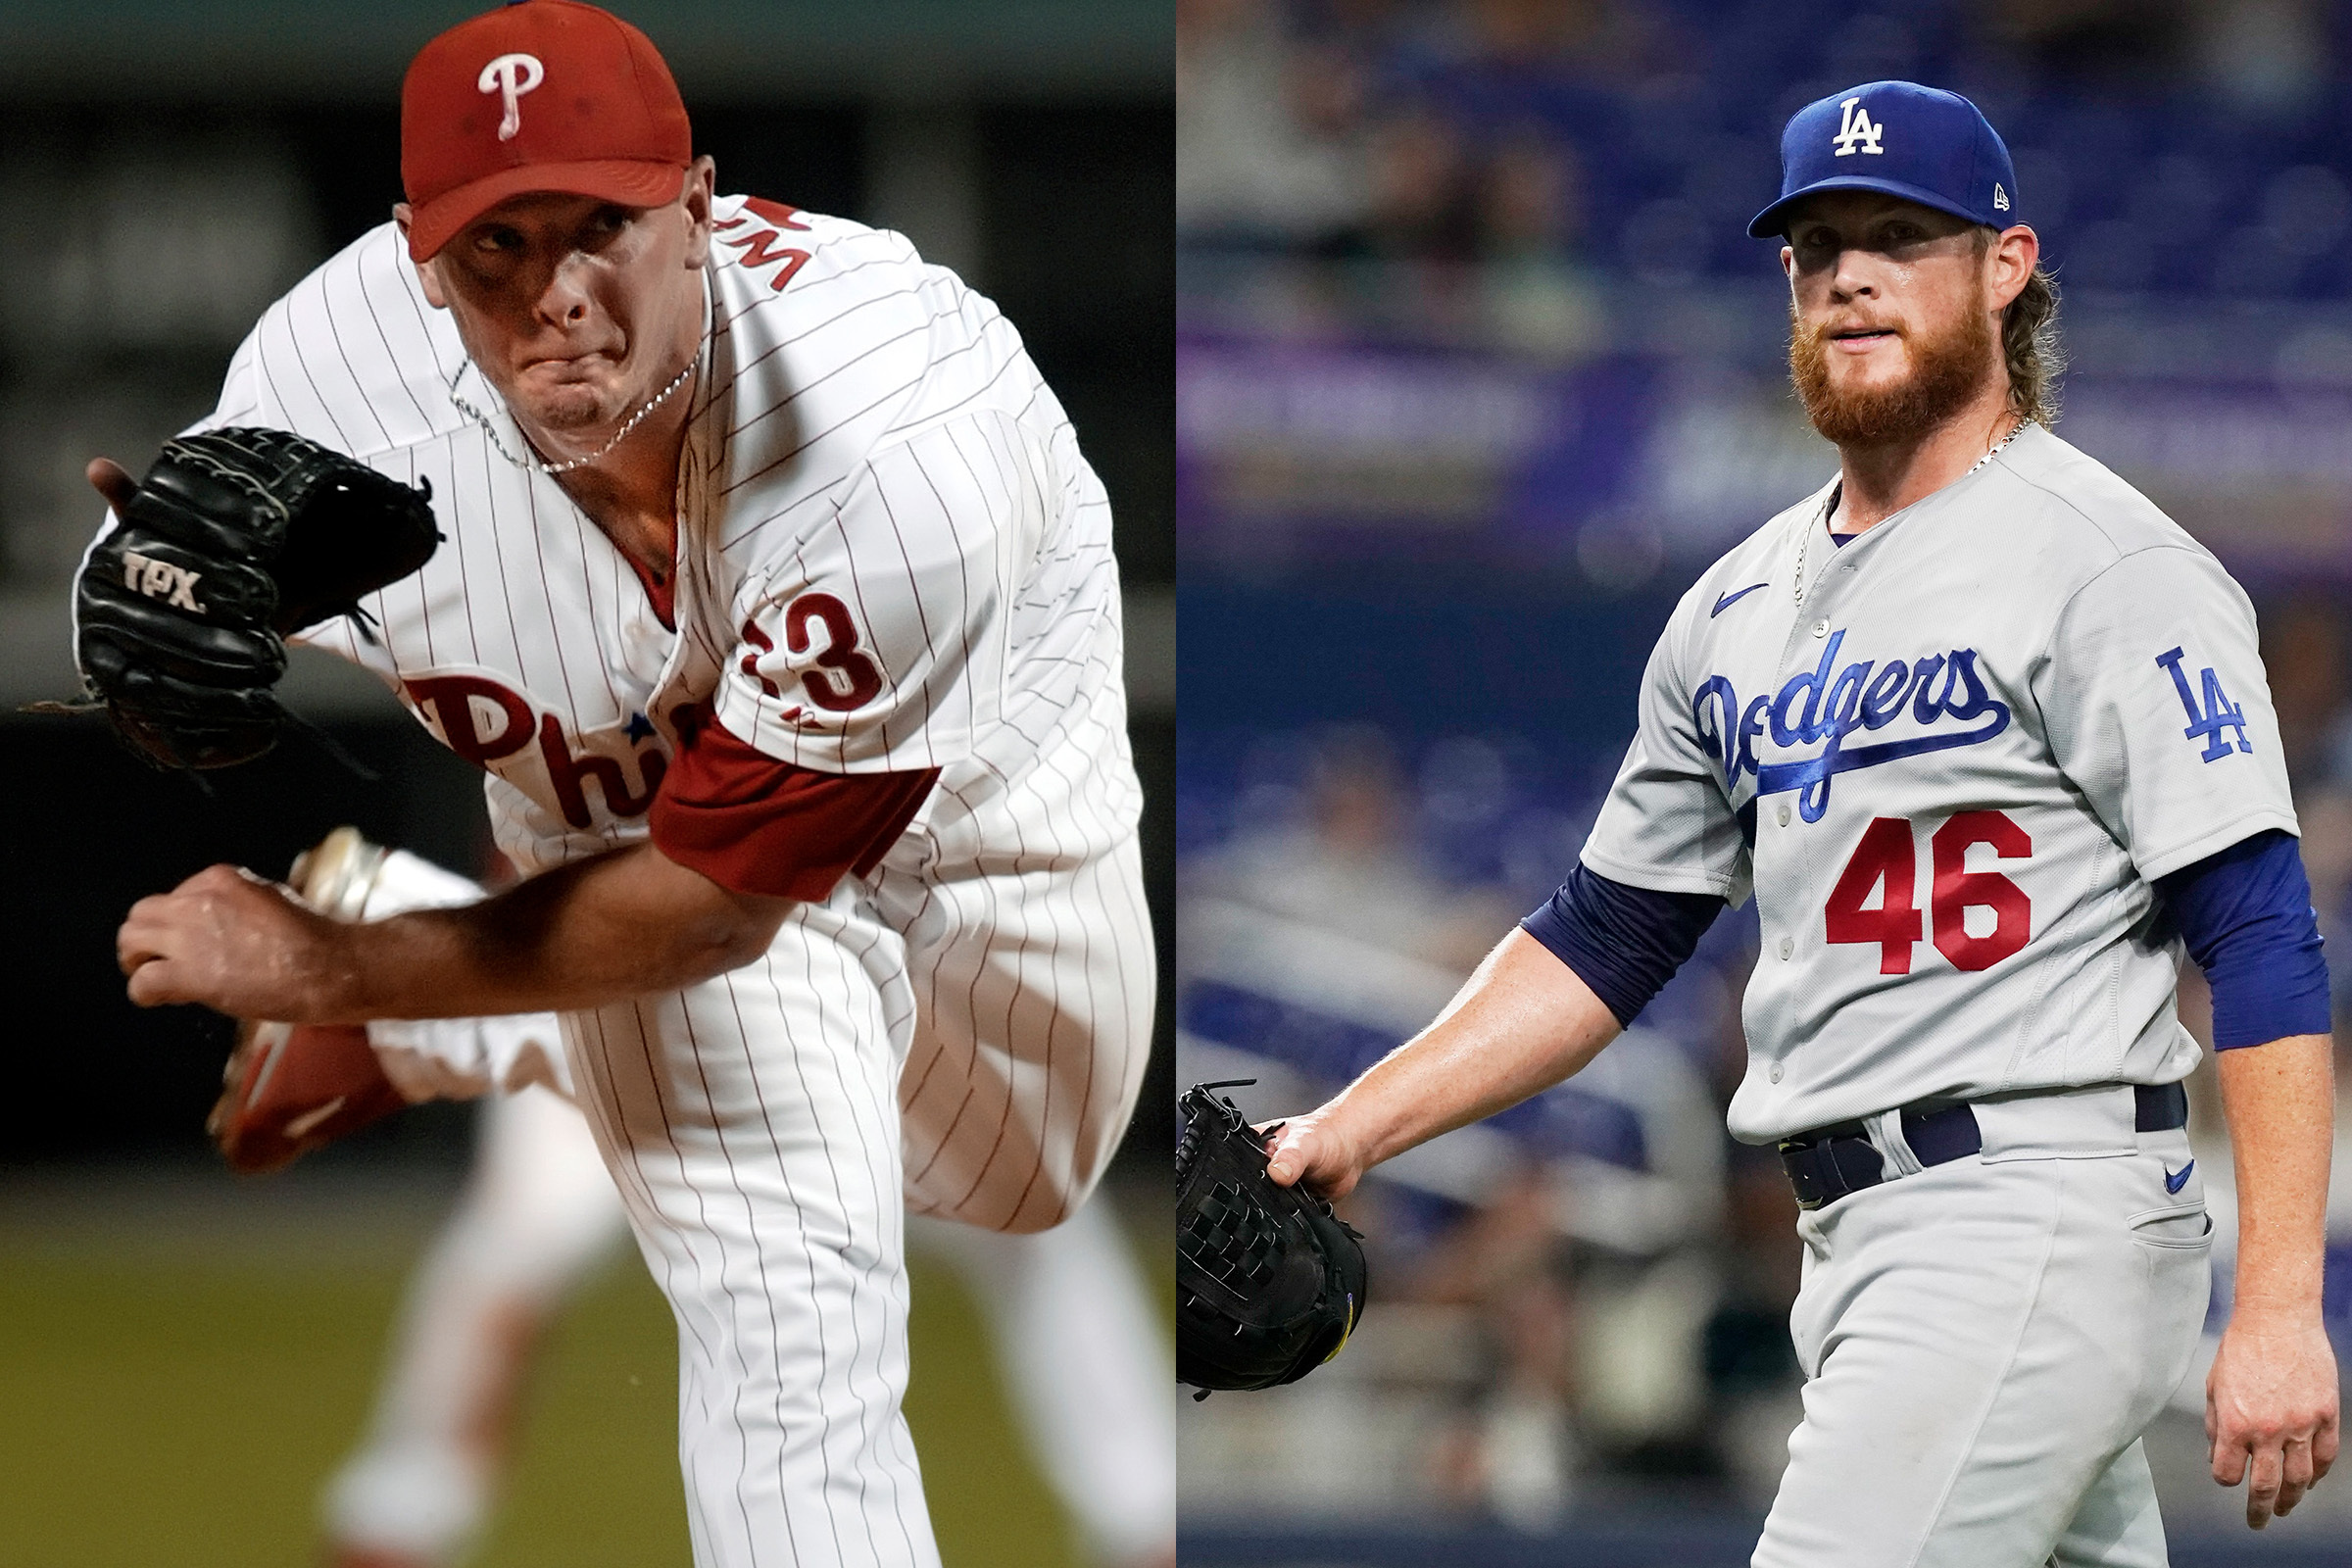 Will Craig Kimbrel reemerge as a closer for the Phillies? His